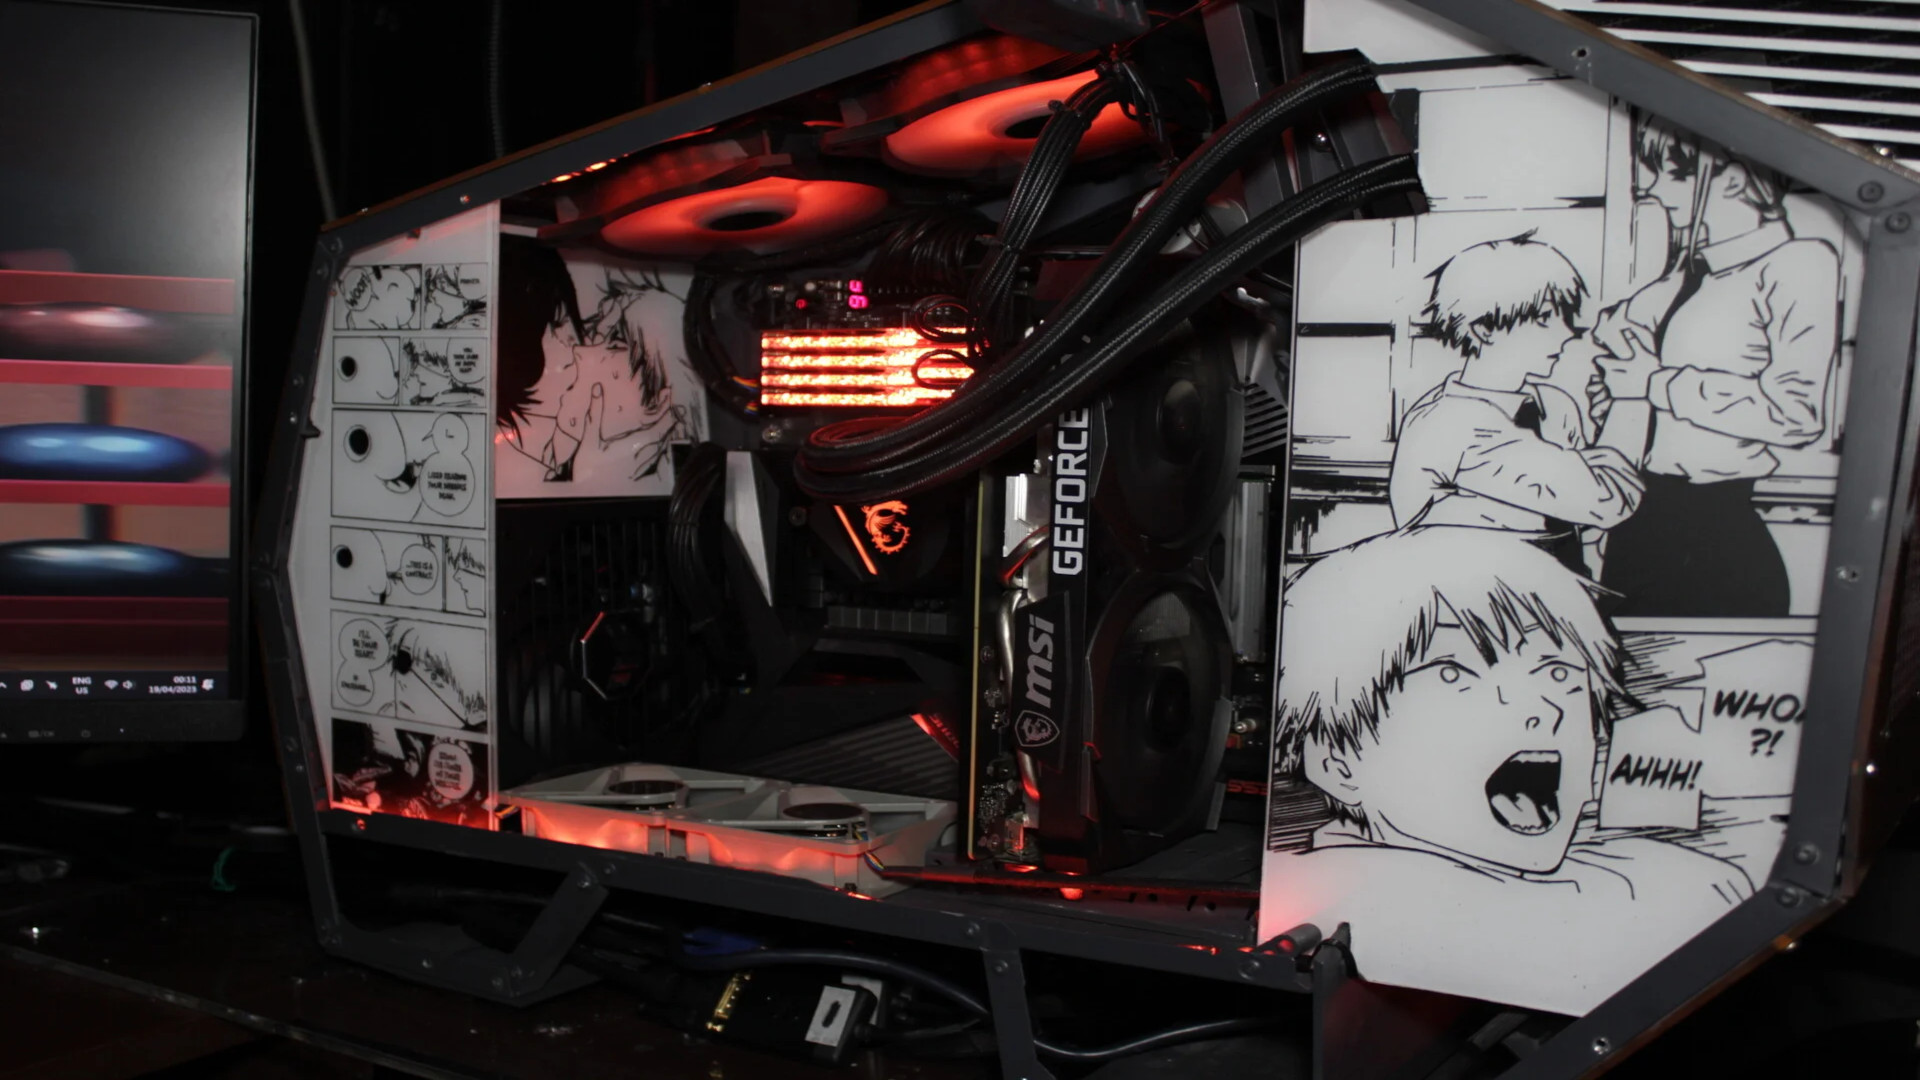 Anime drawn onto the side of the Pochita gaming Pc build